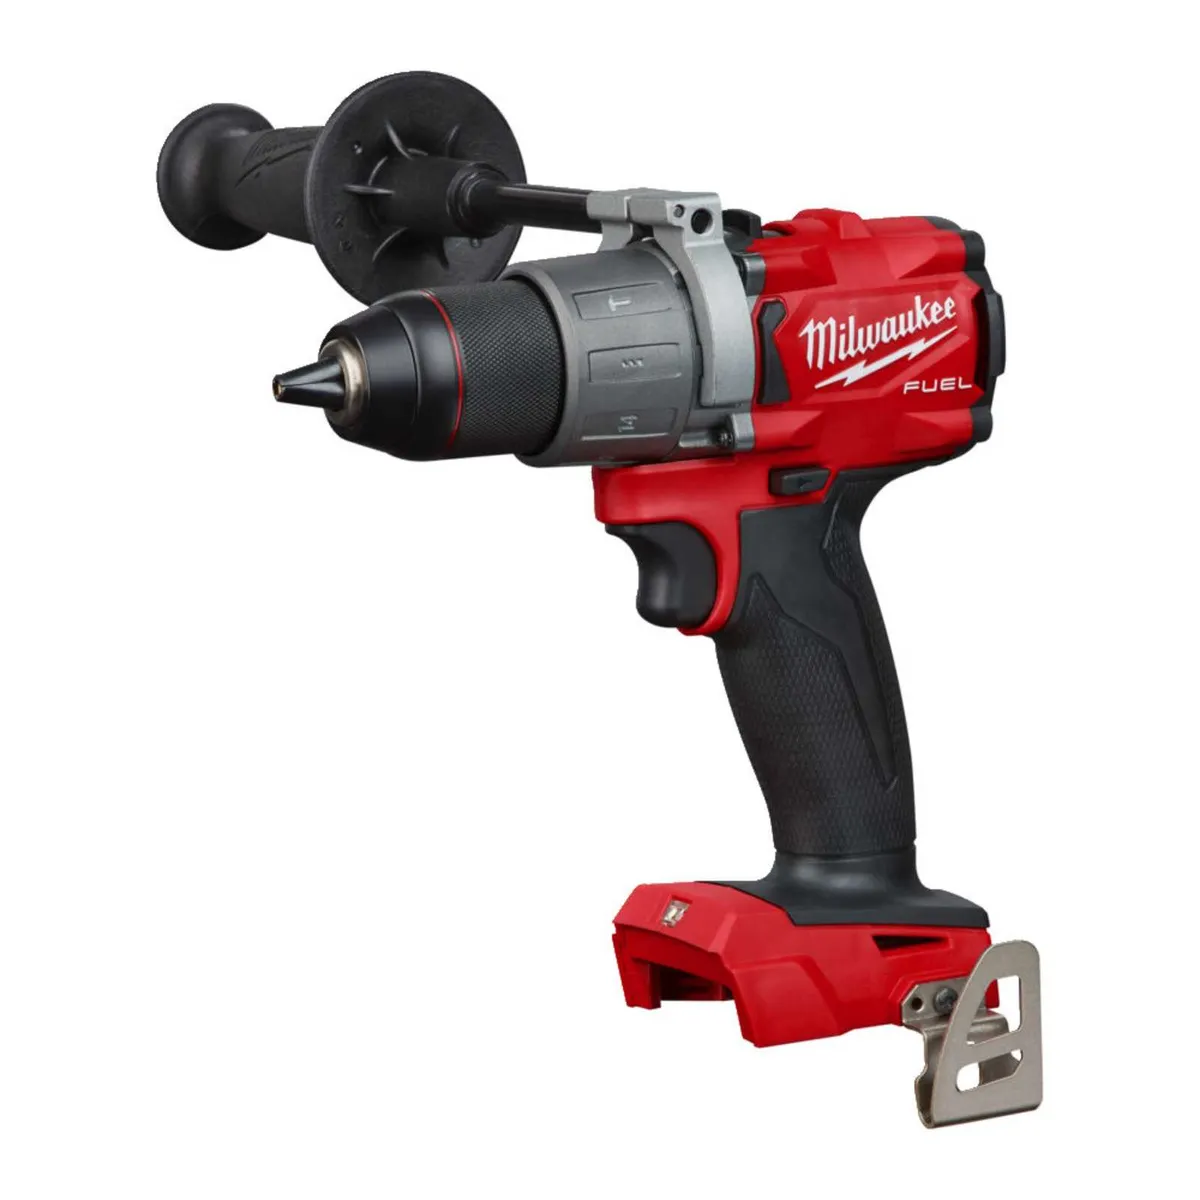 Milwaukee M18 Fuel Combi Drill Naked - Image 1